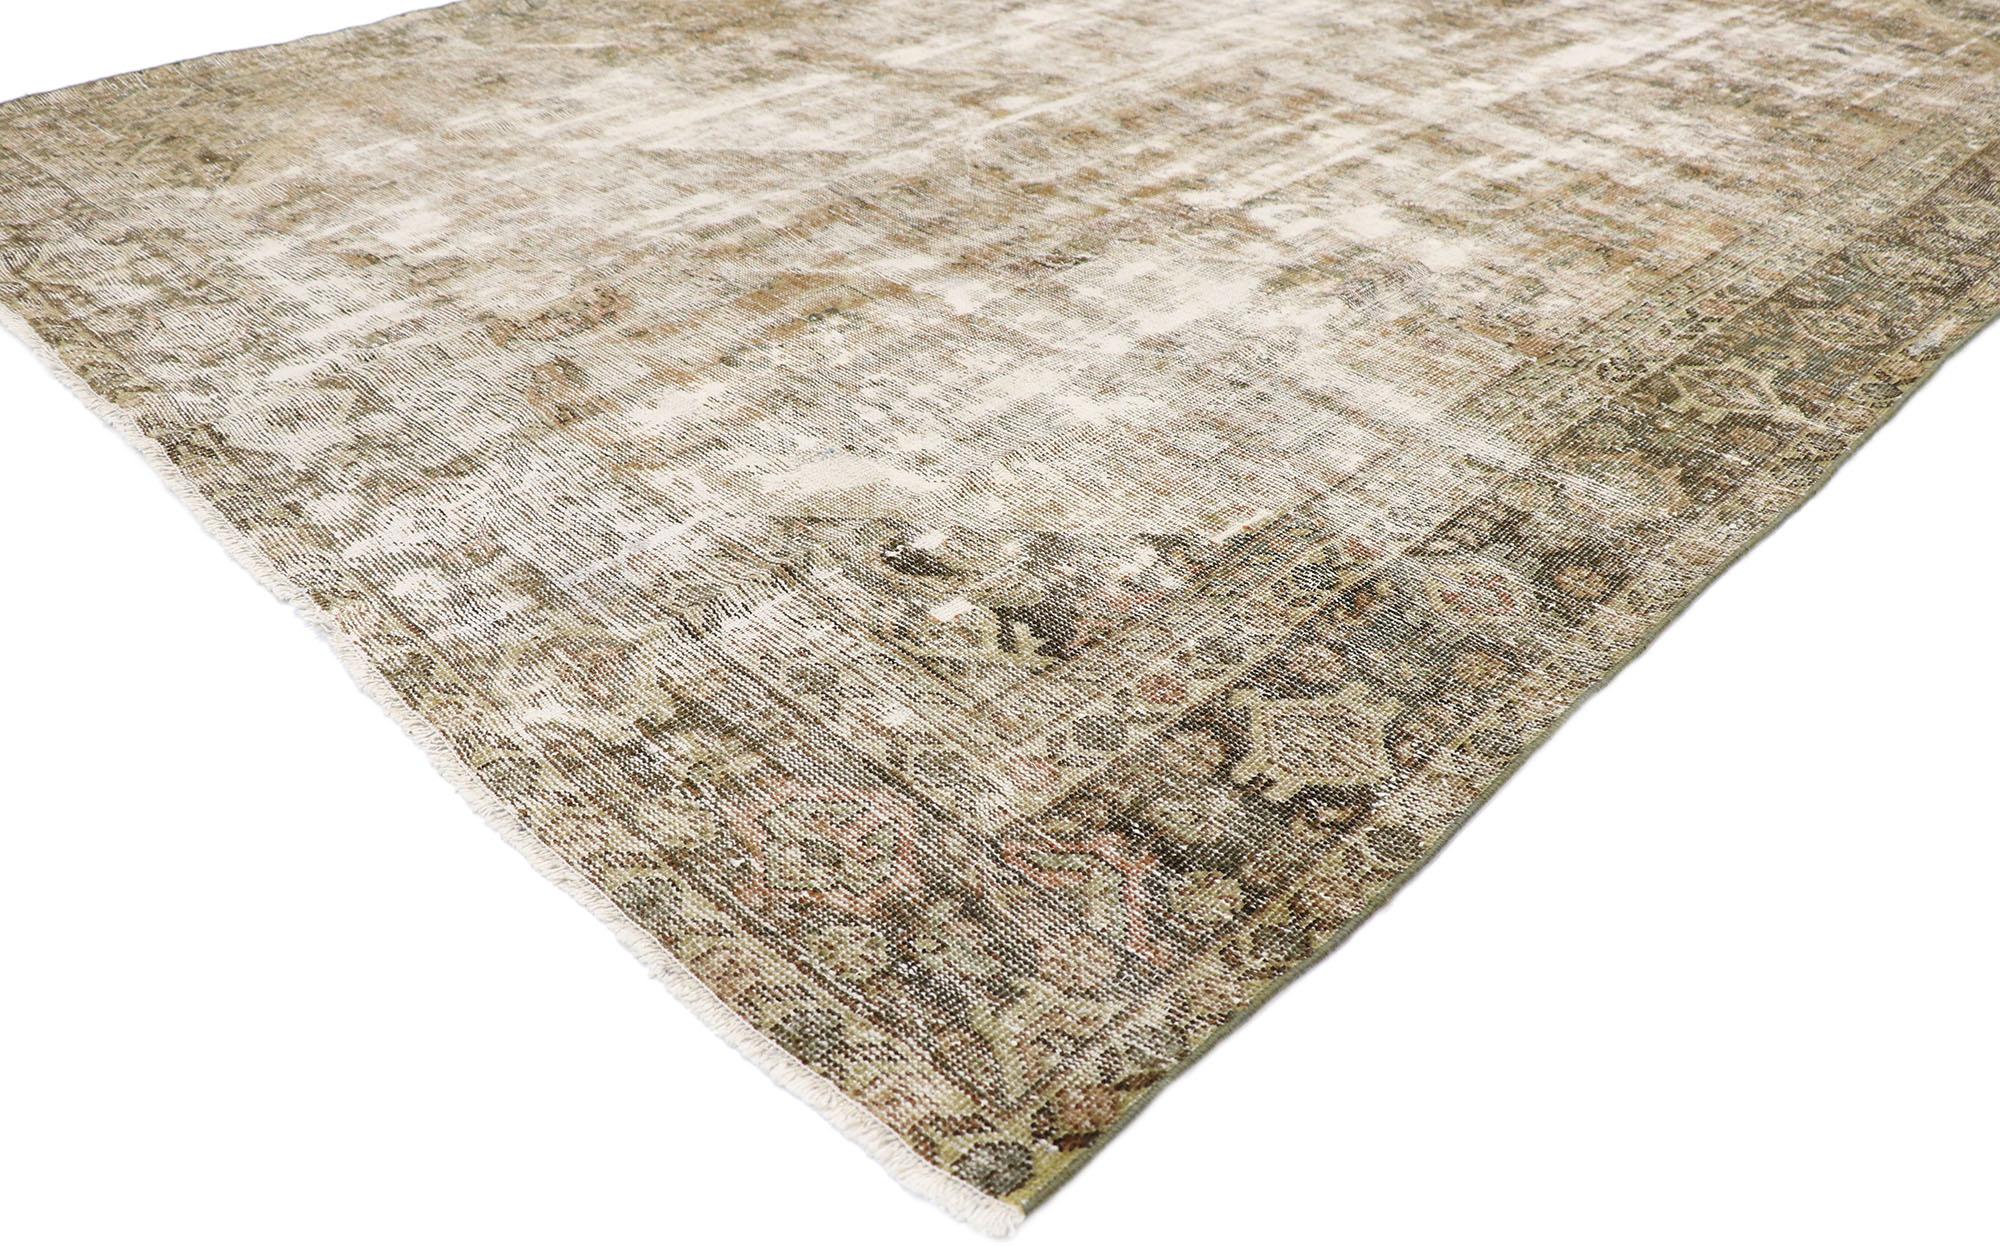 60845 Distressed Antique Persian Mahal rug with Modern Rustic style. Warm and inviting with rustic sensibility, this hand-knotted wool distressed antique Persian Mahal rug features an all-over geometric botanical pattern. It is enclosed with a